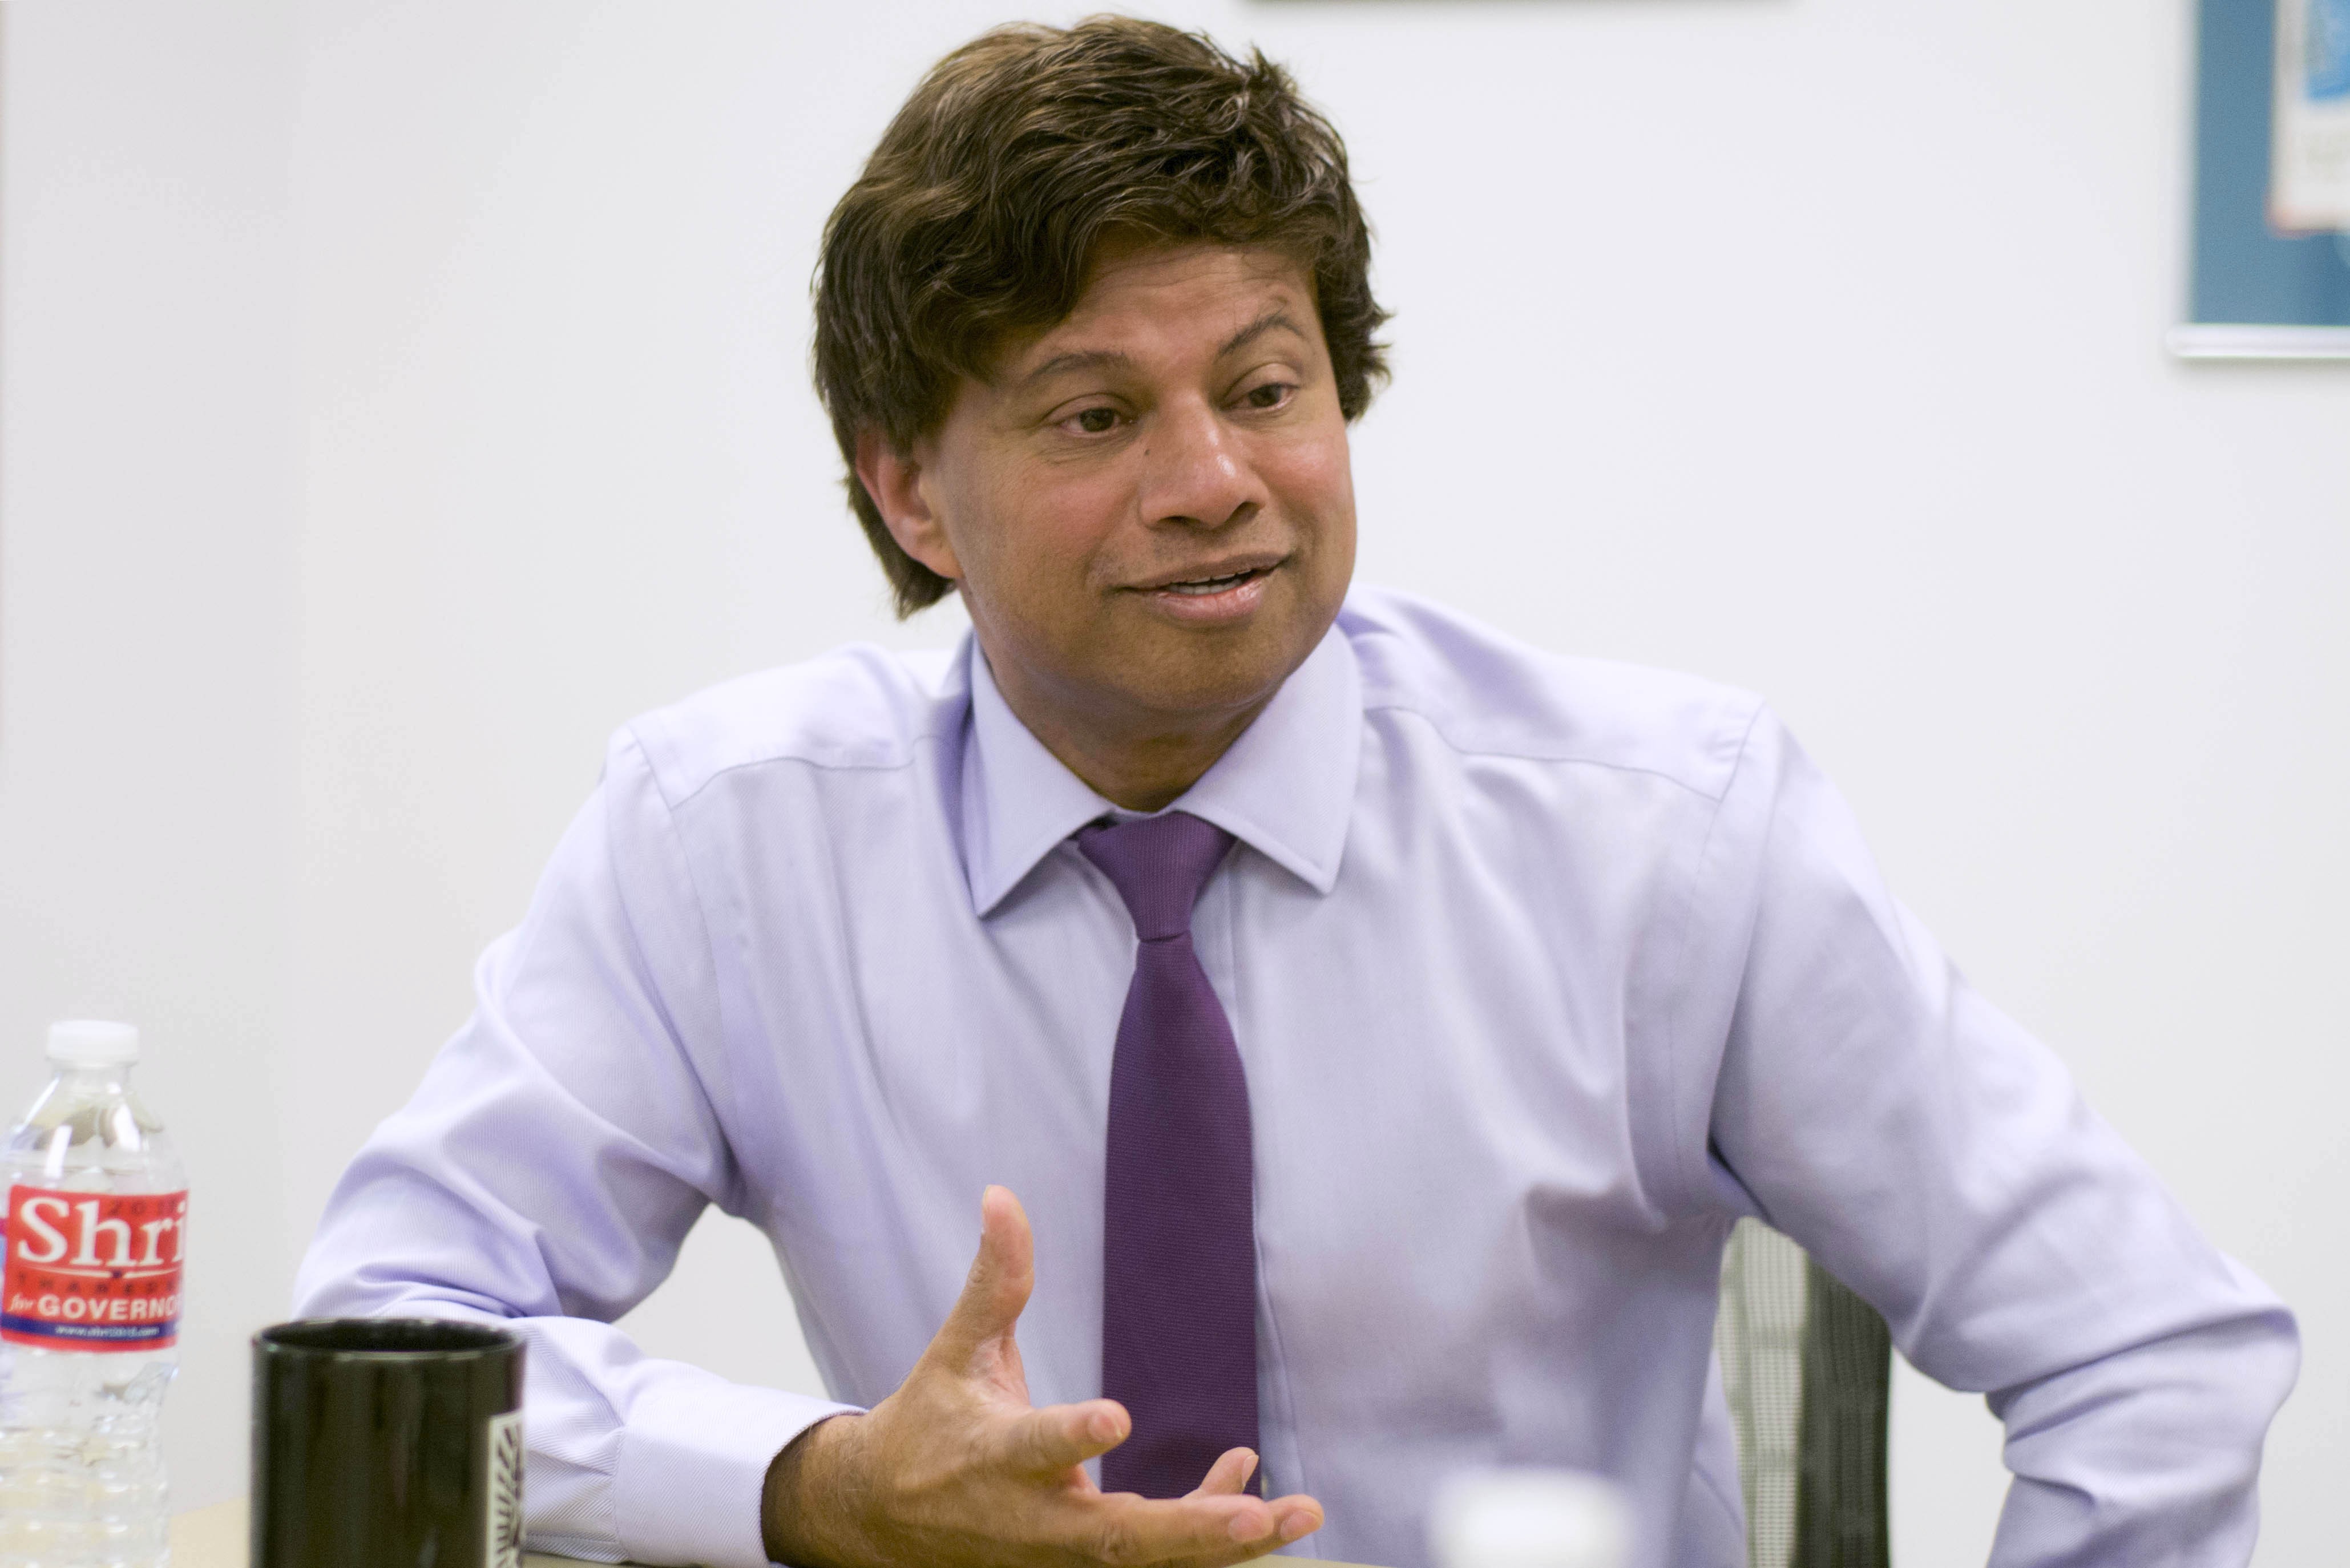 Shri Thanedar now leads Whitmer in polls for Governor, despite endorsements from Mike ...4118 x 2748